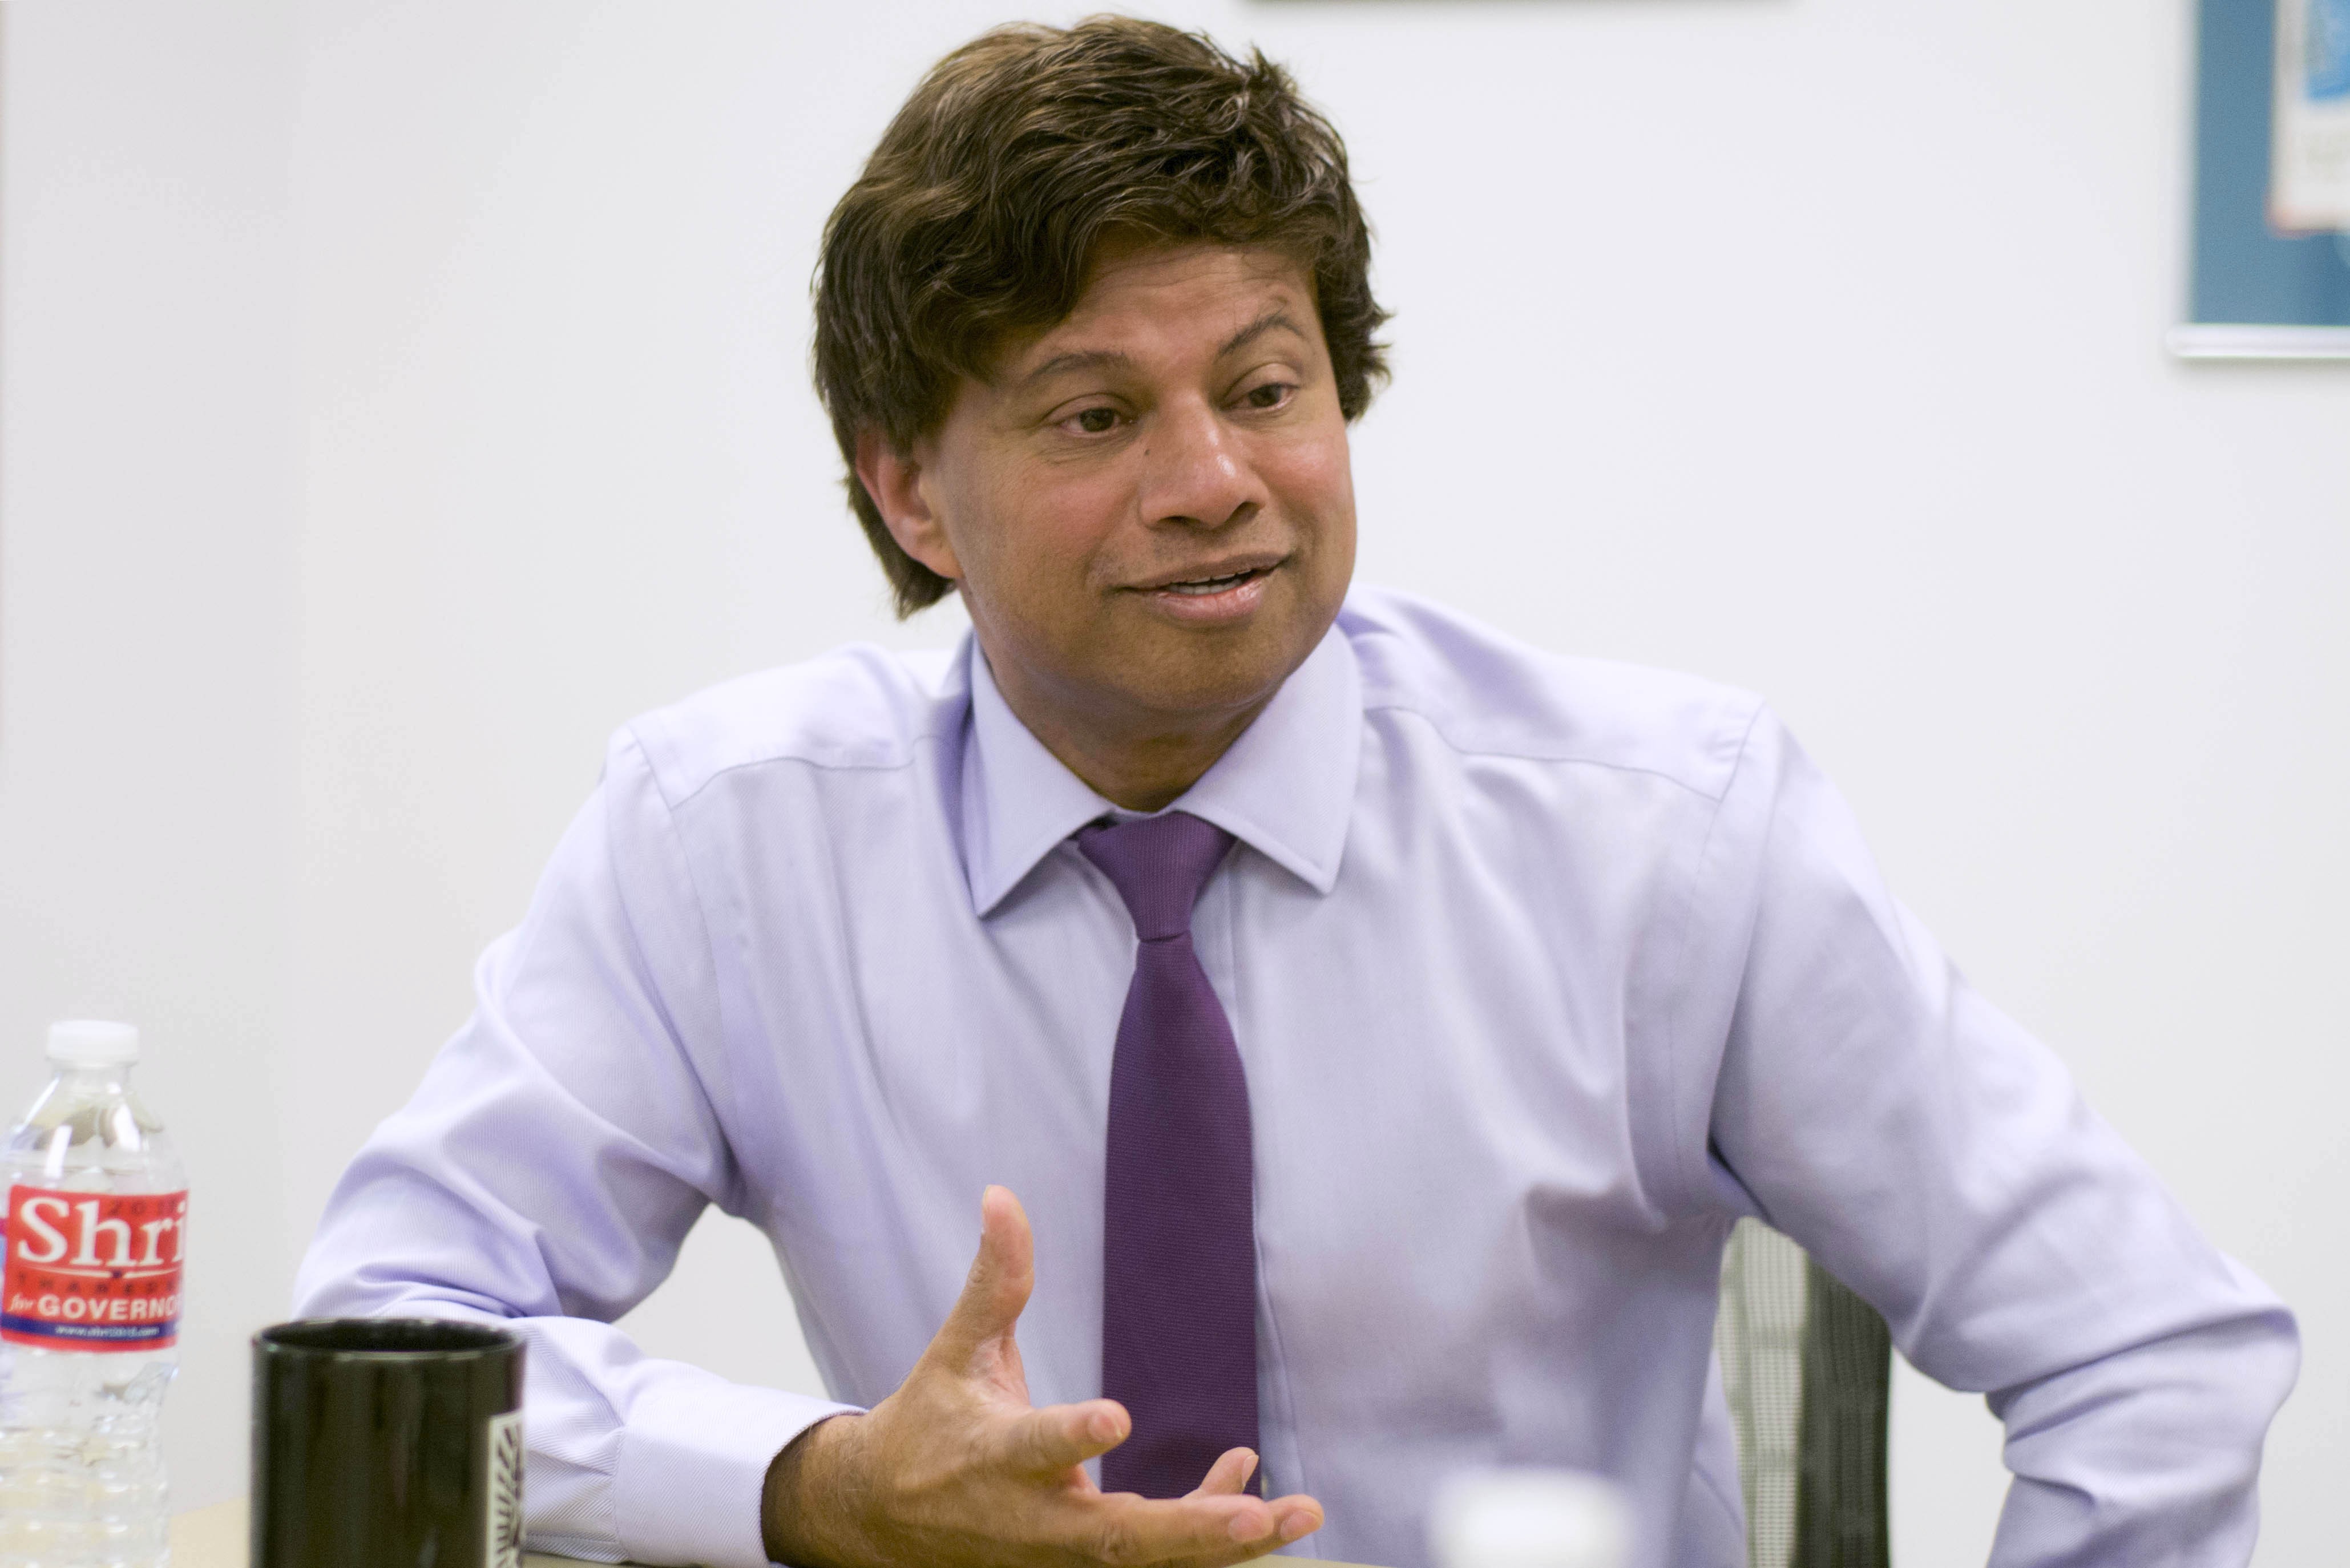 Shri Thanedar now leads Whitmer in polls for Governor, despite endorsements from Mike ...4118 x 2748